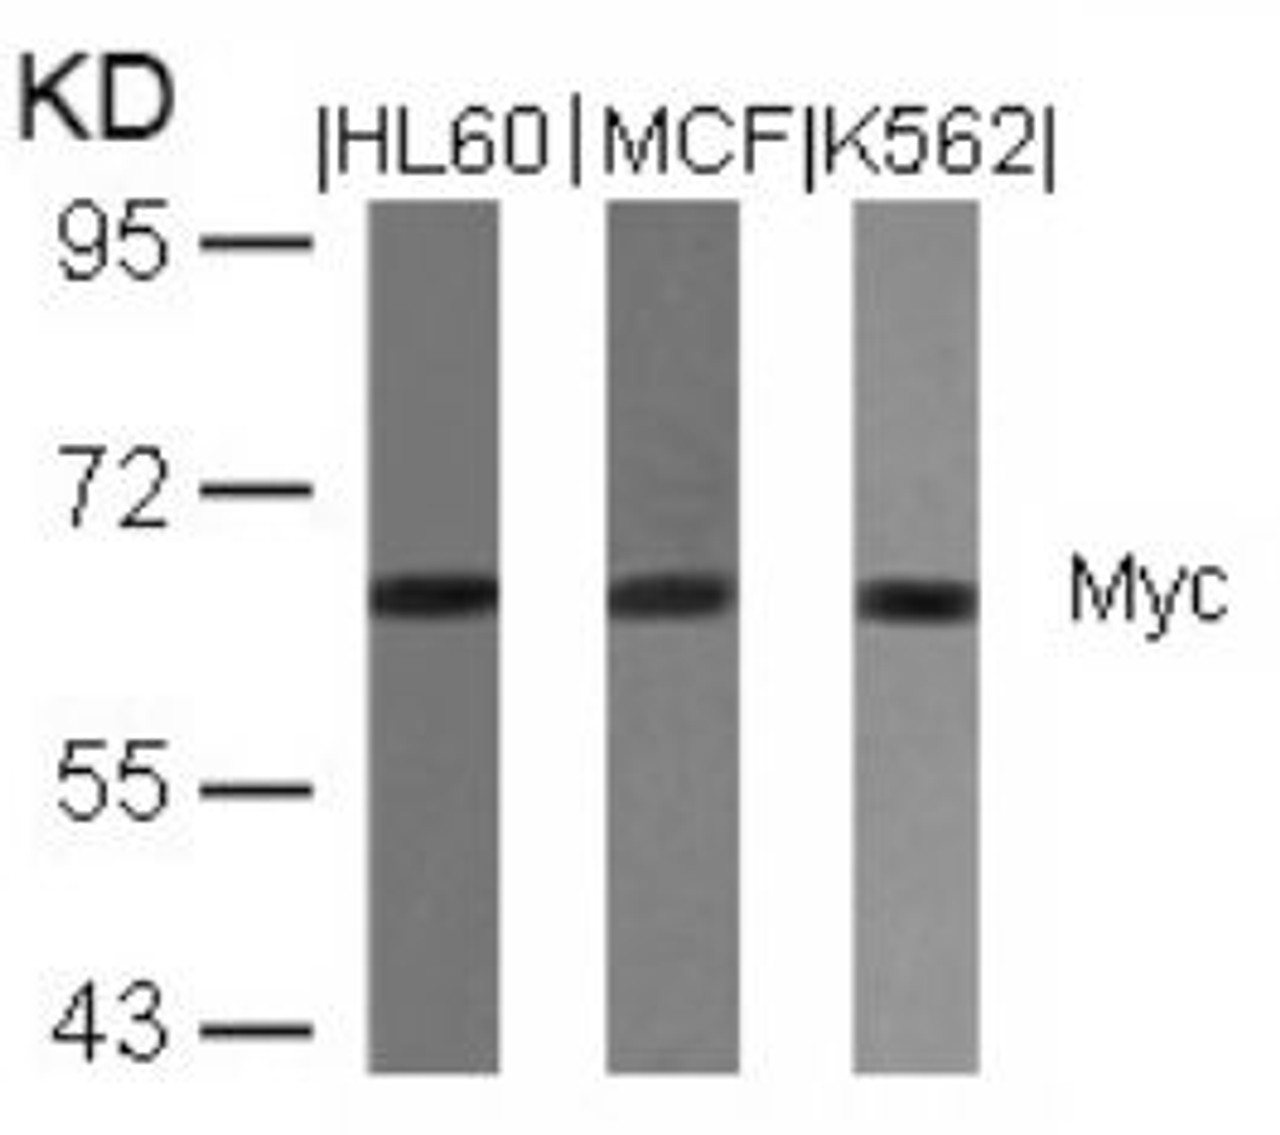 Western blot analysis of lysed extracts from HL60, MCF and K562 cells using Myc (Ab-358) .